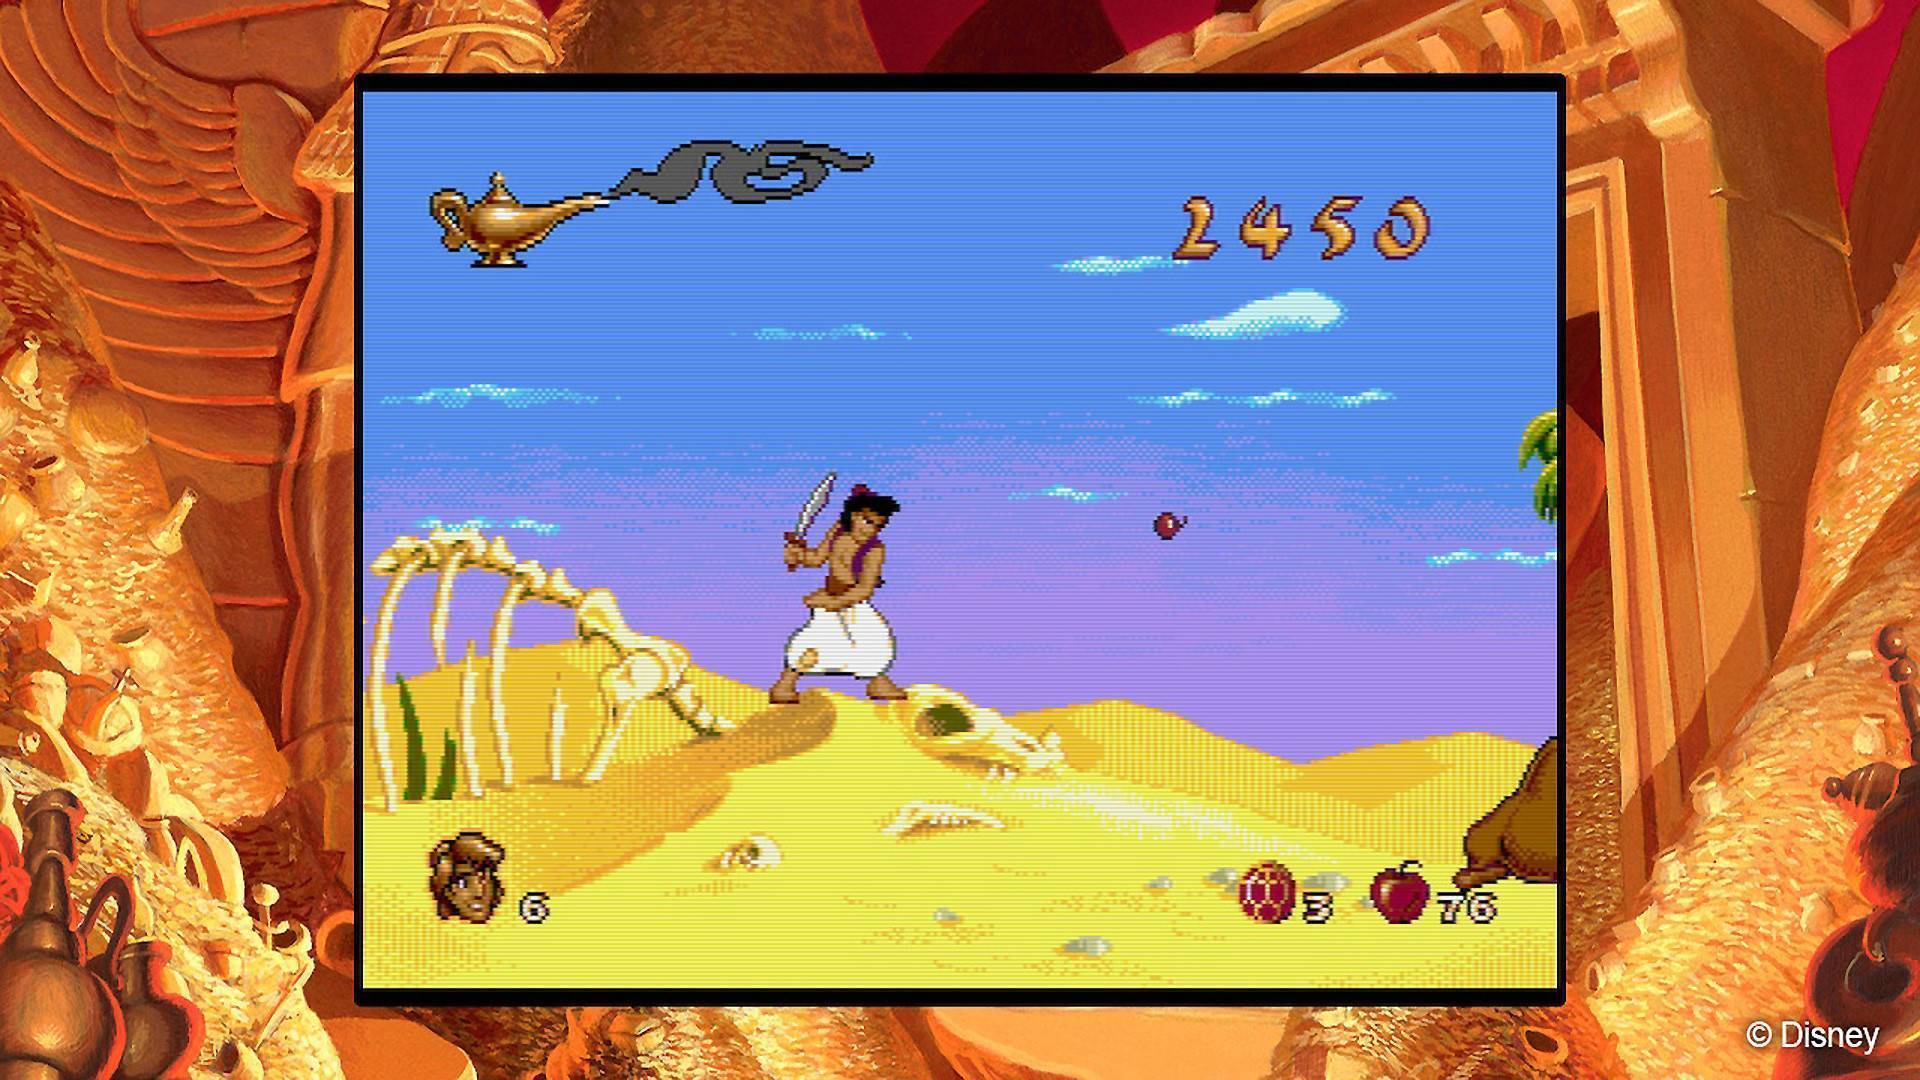 Disney Classic Games Aladdin And The Lion King Pc Key Cheap Price Of 2 47 For Steam